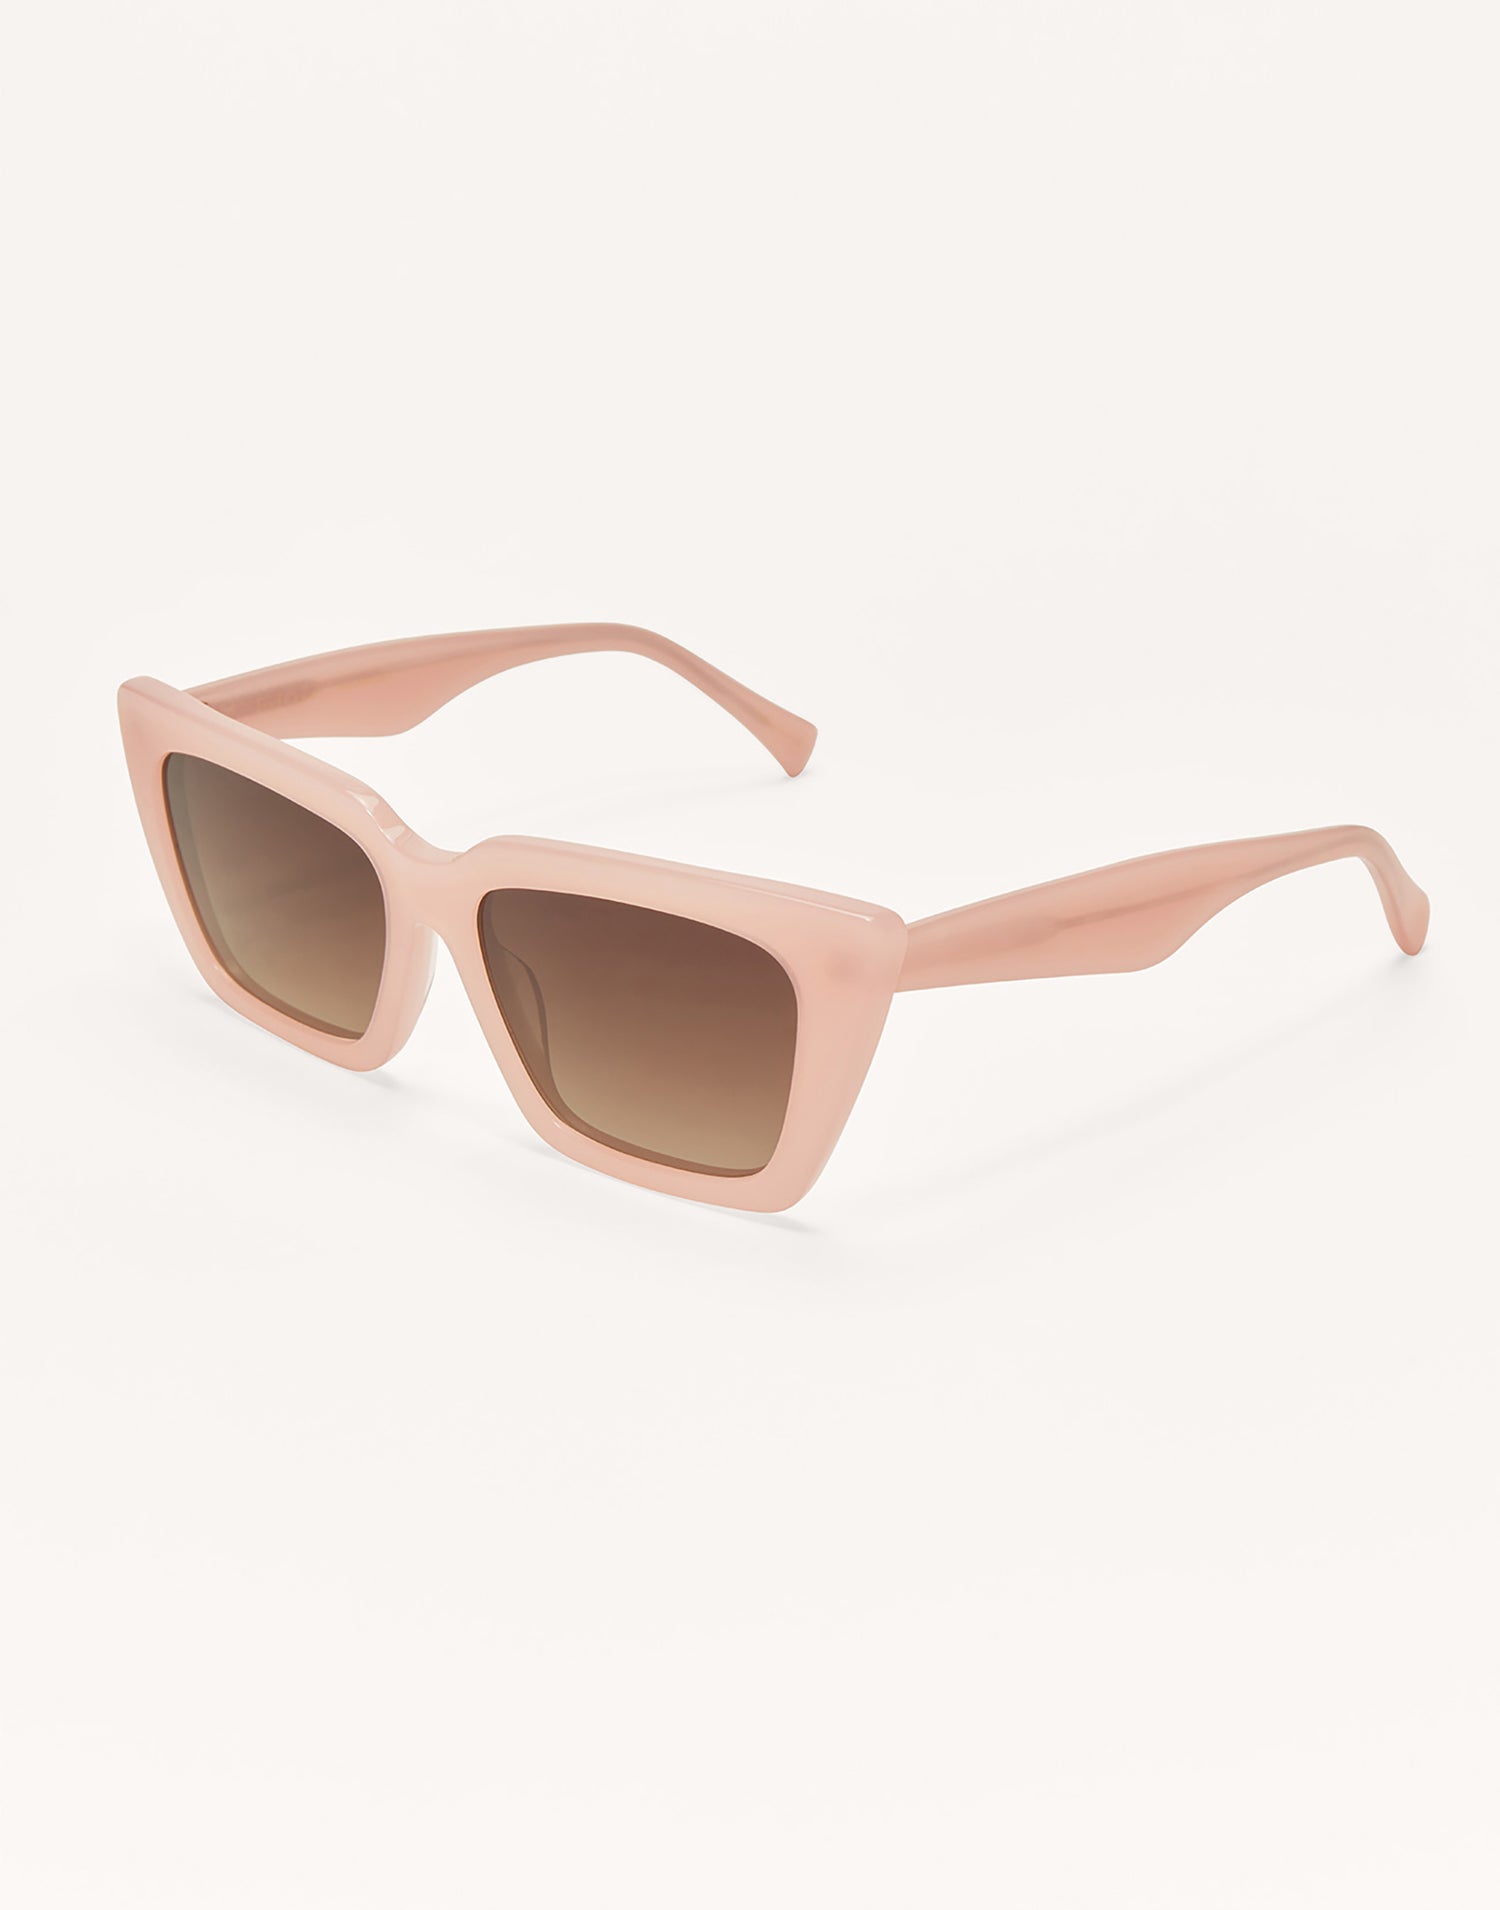 Feel Good Sunglasses by Z Supply in Blush Pink - Angled View